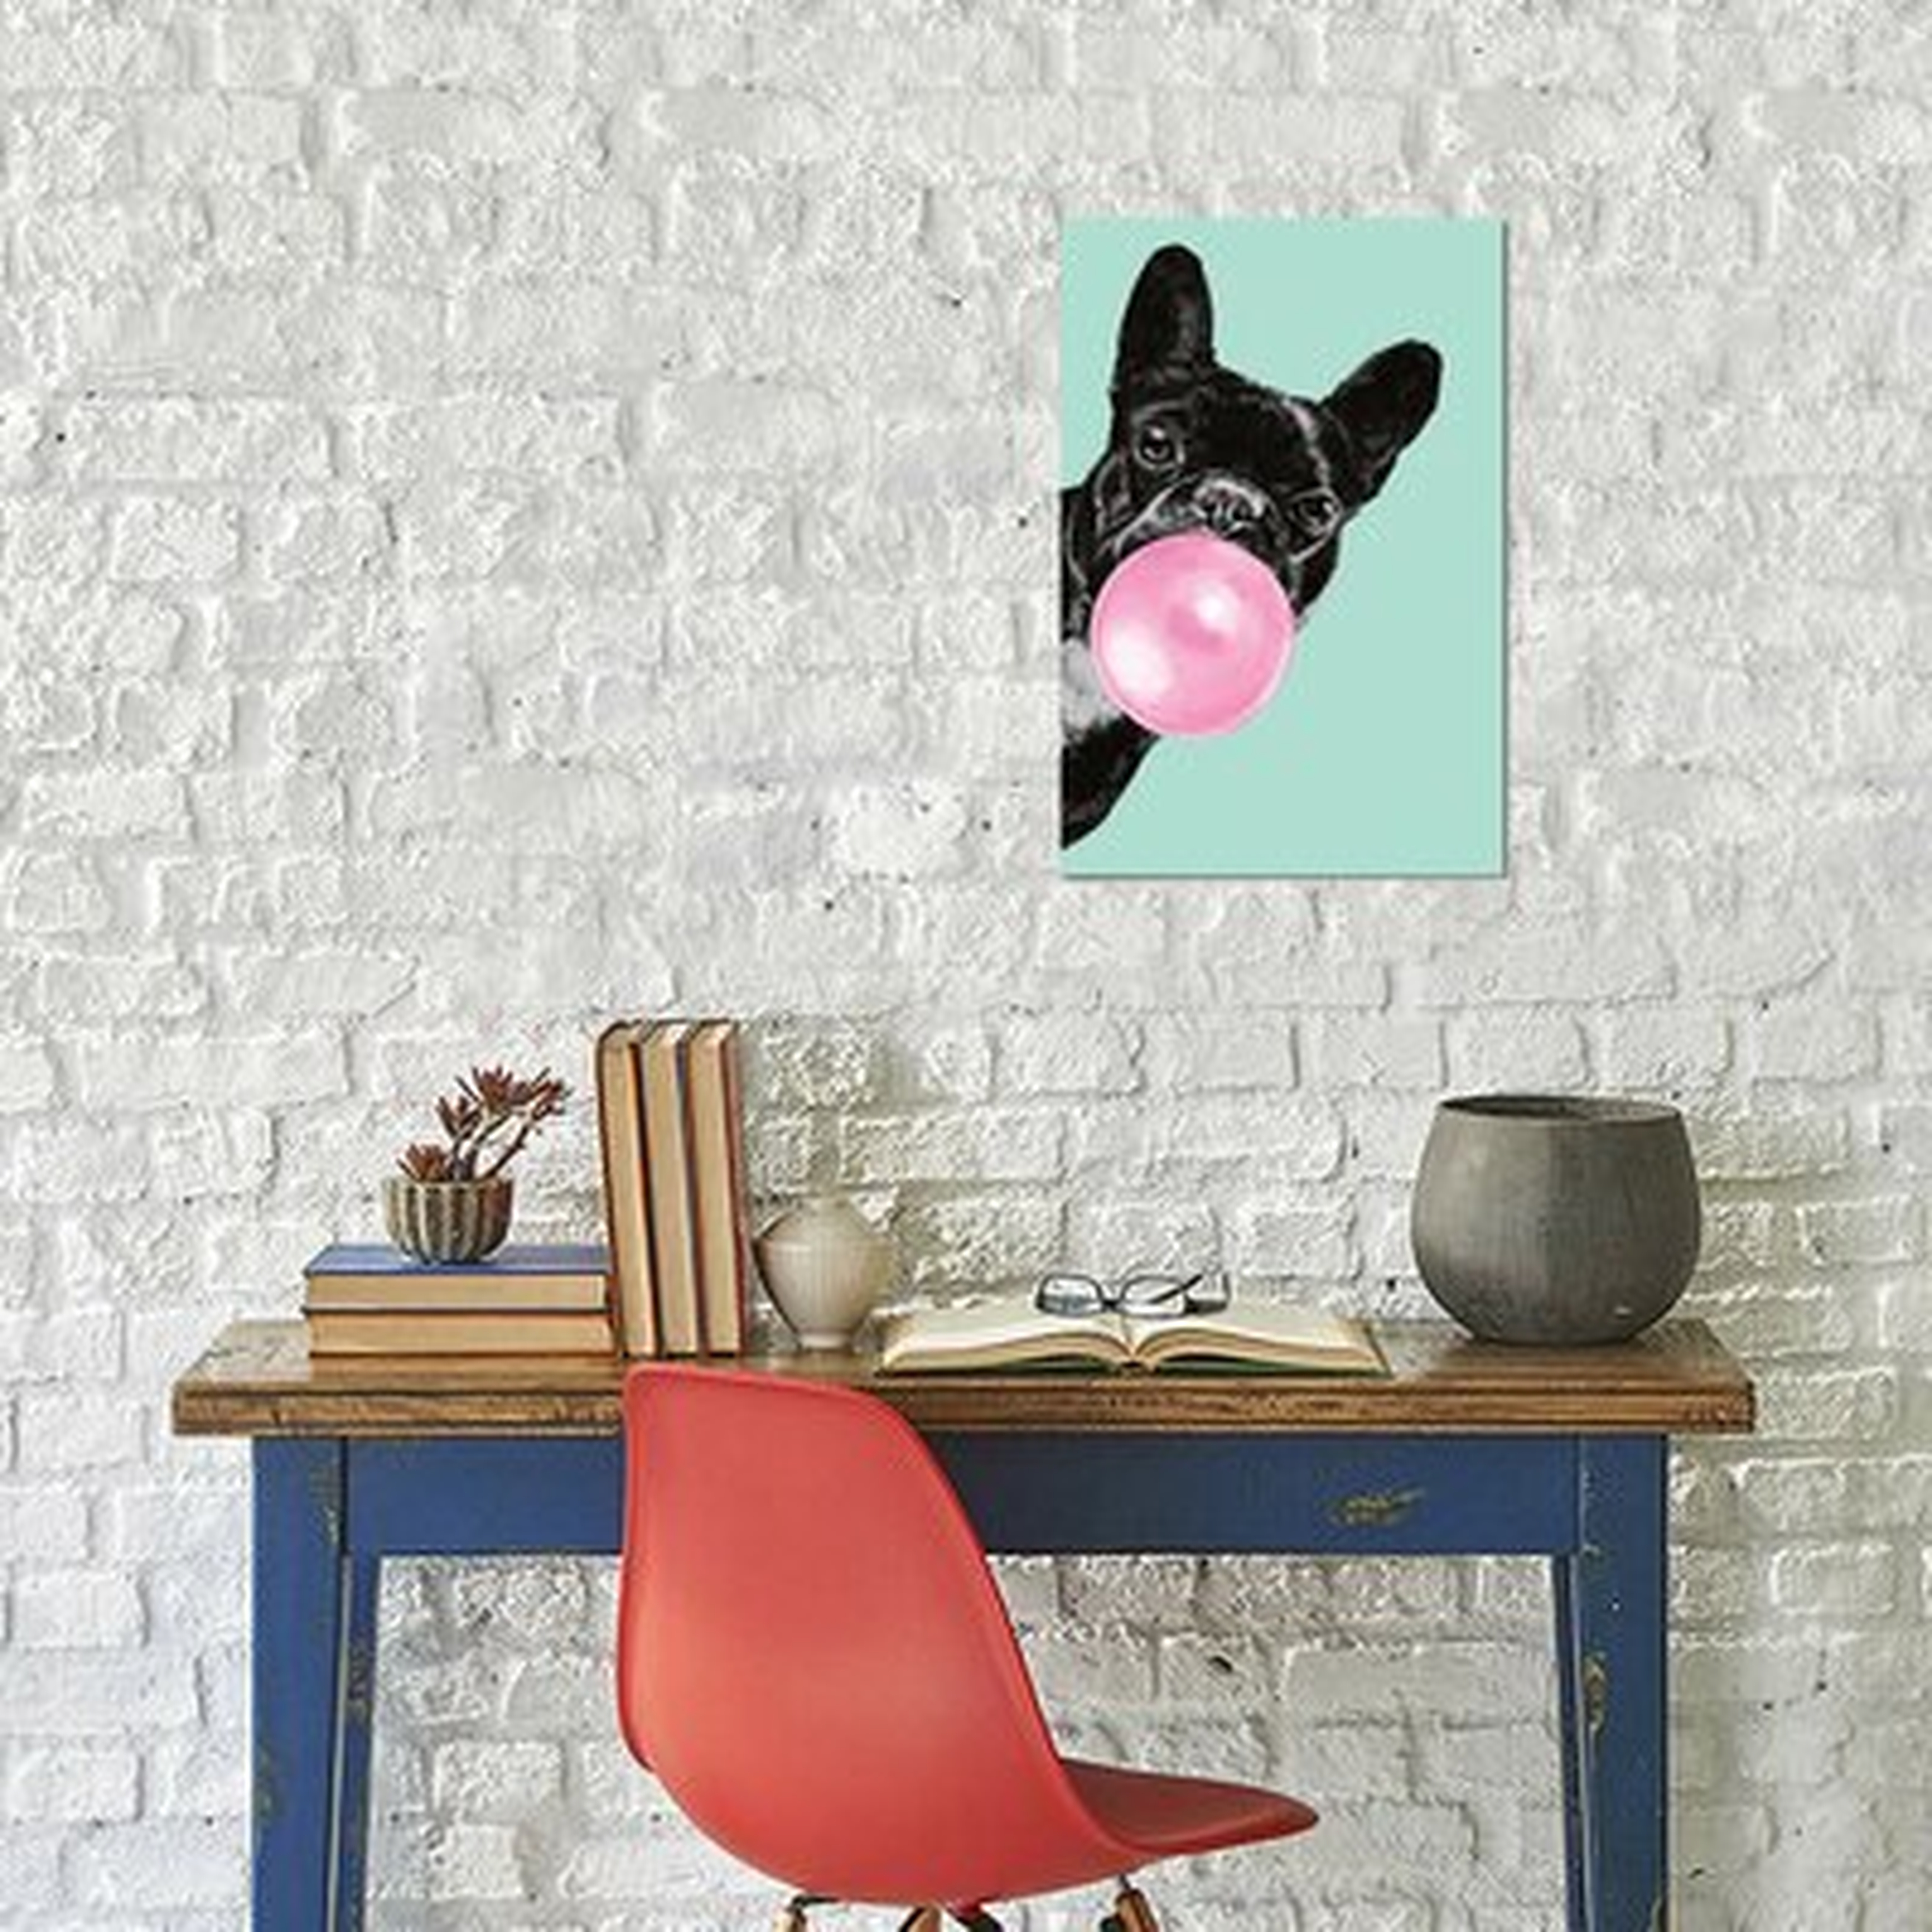 Big Nose Work 'Sneaky Bulldog Blowing Bubble Gum' Graphic Art Print on Wrapped Canvas - Wayfair